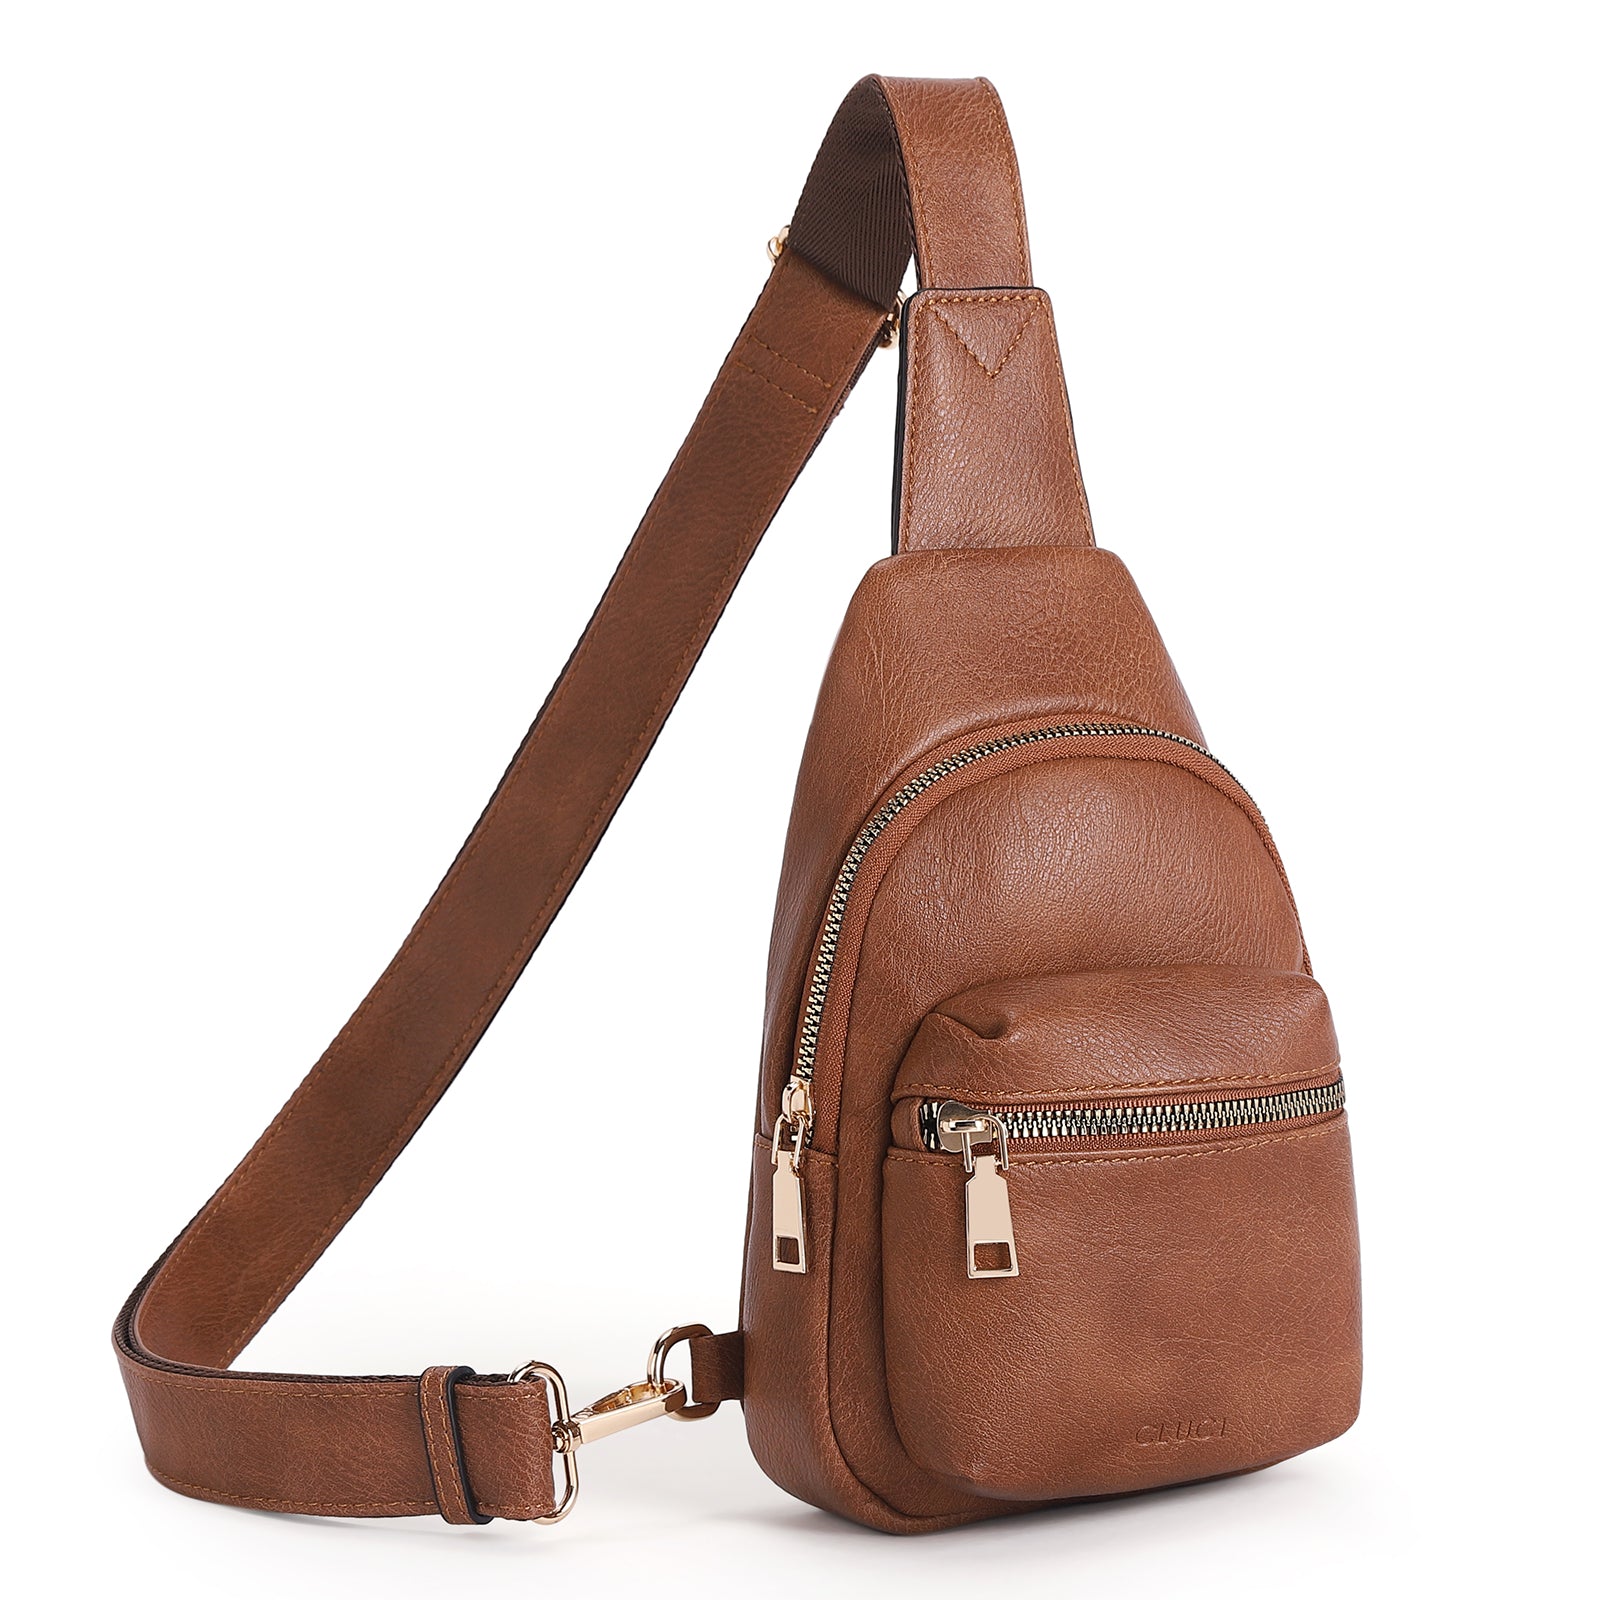 Shop Leather Sling Bag, Crossbody Fanny Pack, Chest Bags -HIMODA